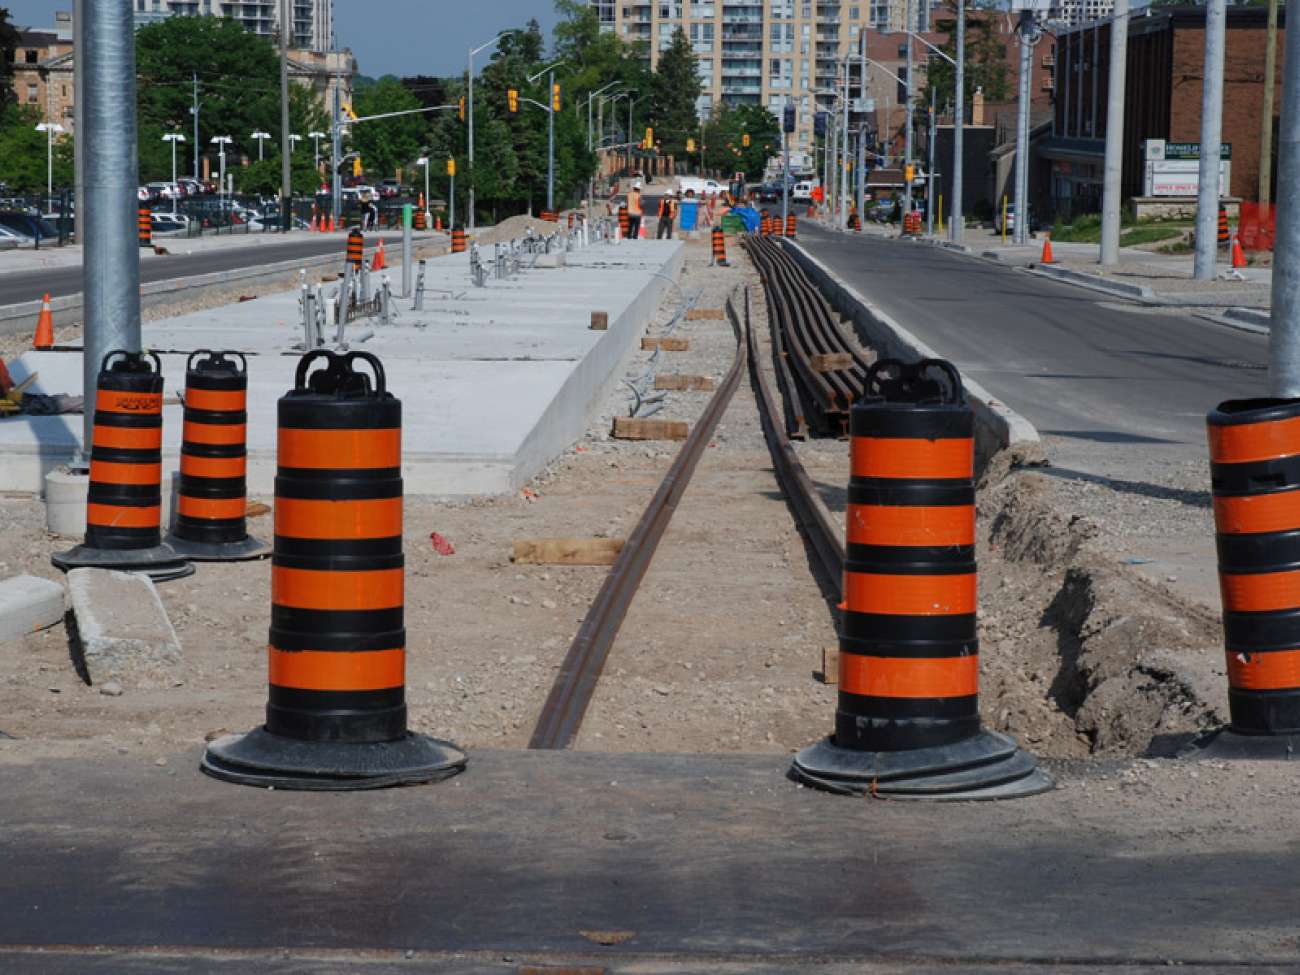 Looking west along King Street at the new GRH ION stop